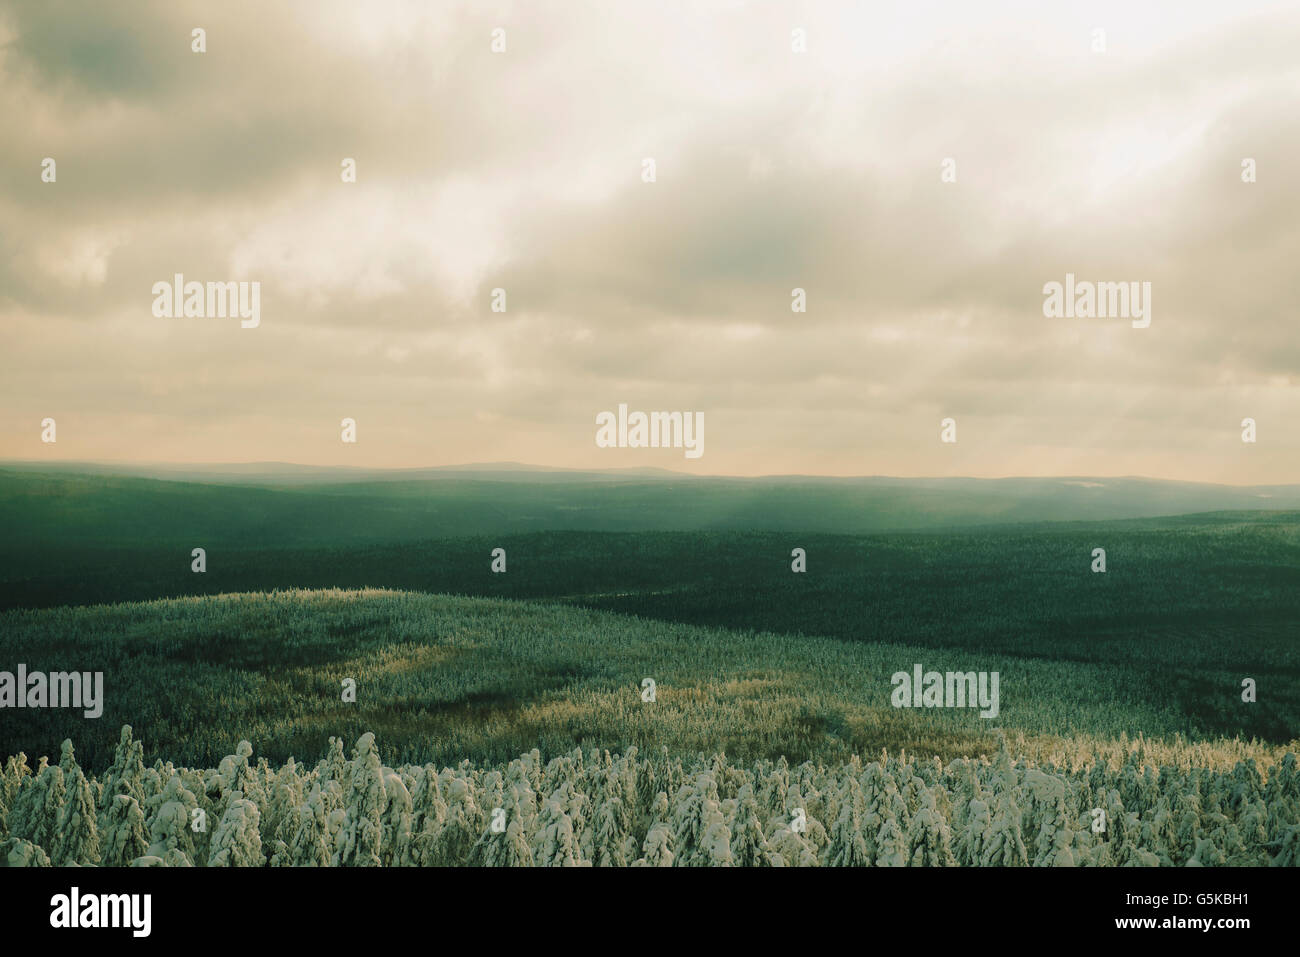 Forests in remote landscape Stock Photo